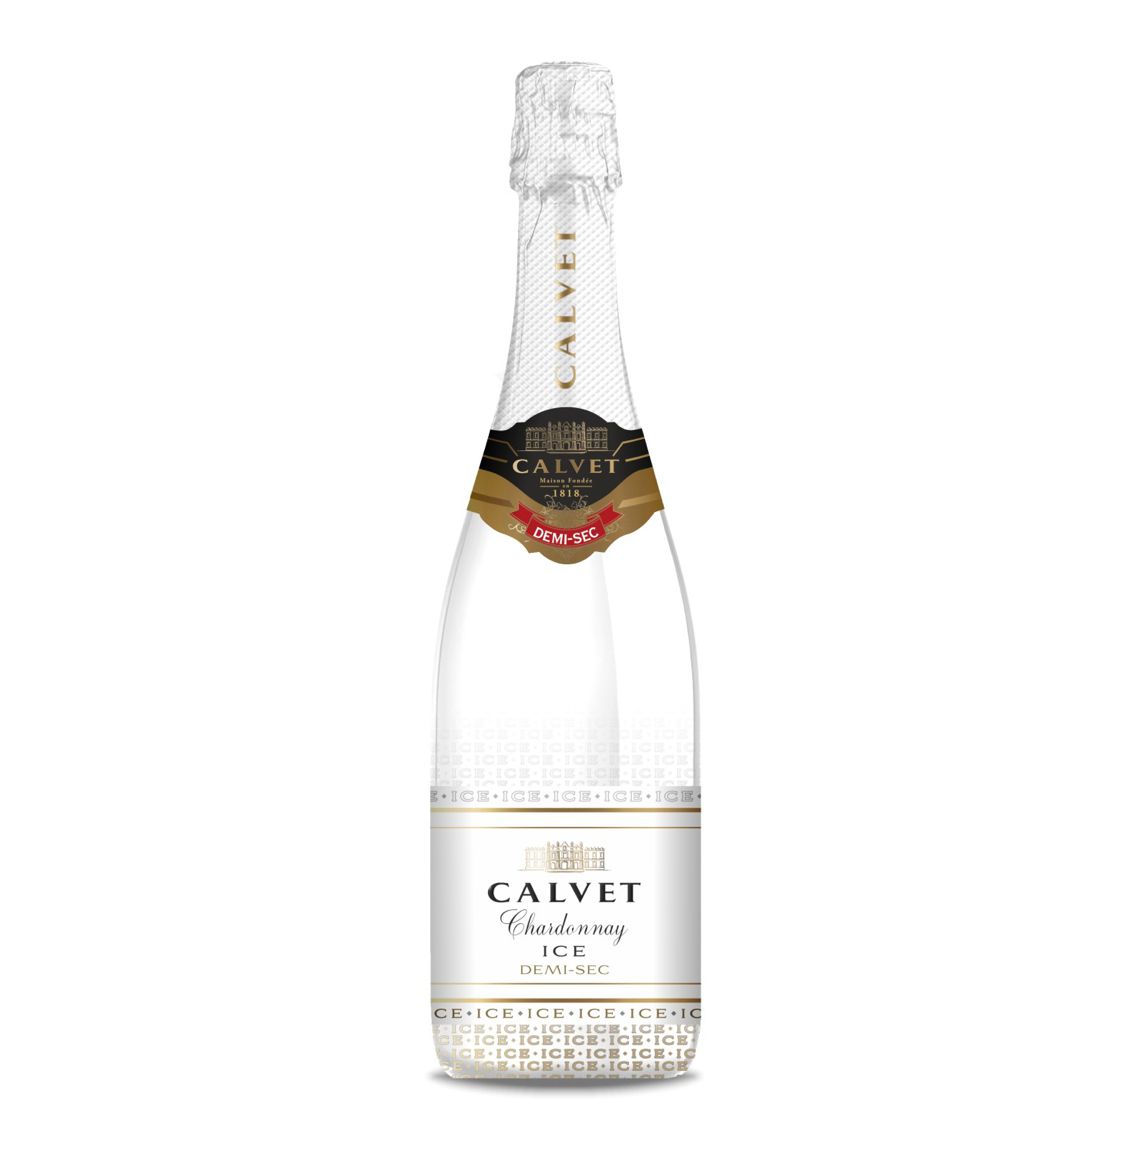 Top 10 Sparkling wines for weddings